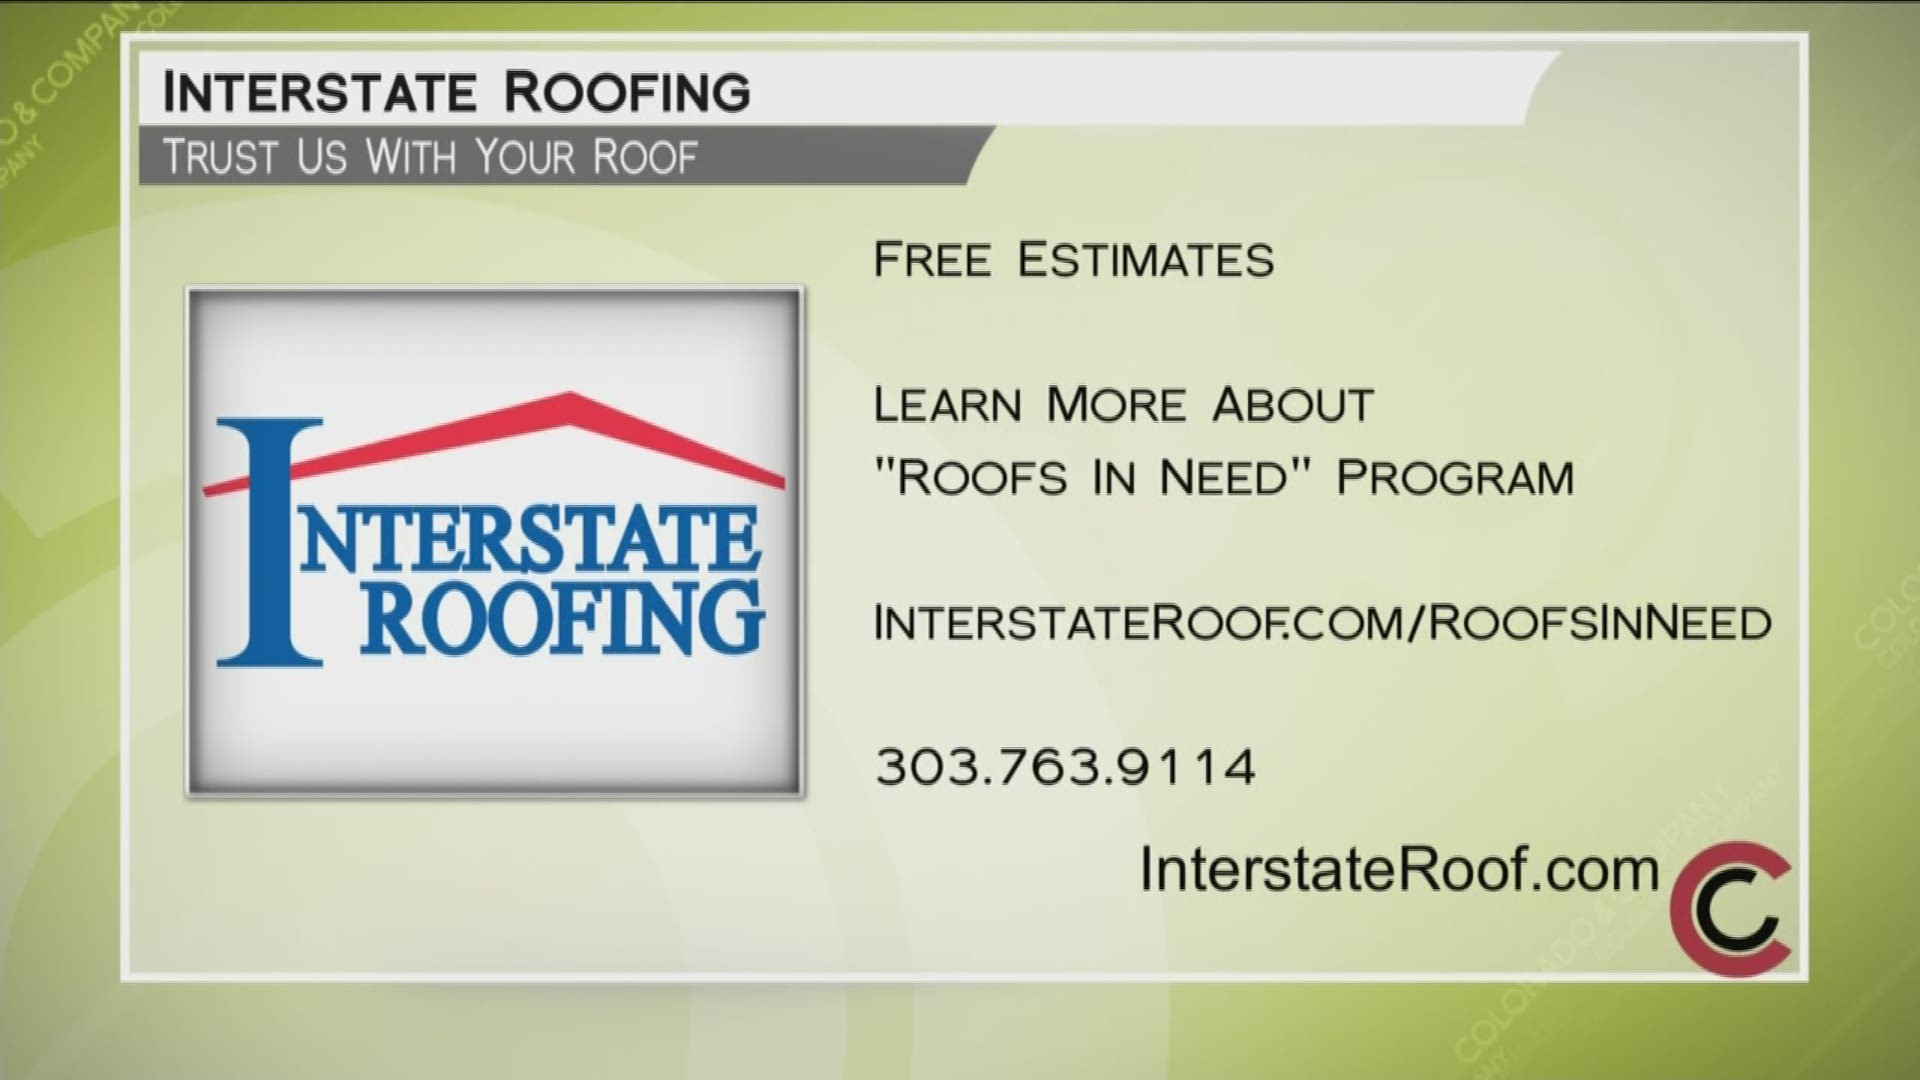 Call Interstate Roofing for quality, honest and professional roofing services. Schedule a free estimate at 720.571.0511, or go online to www.InterstateRoof.com.